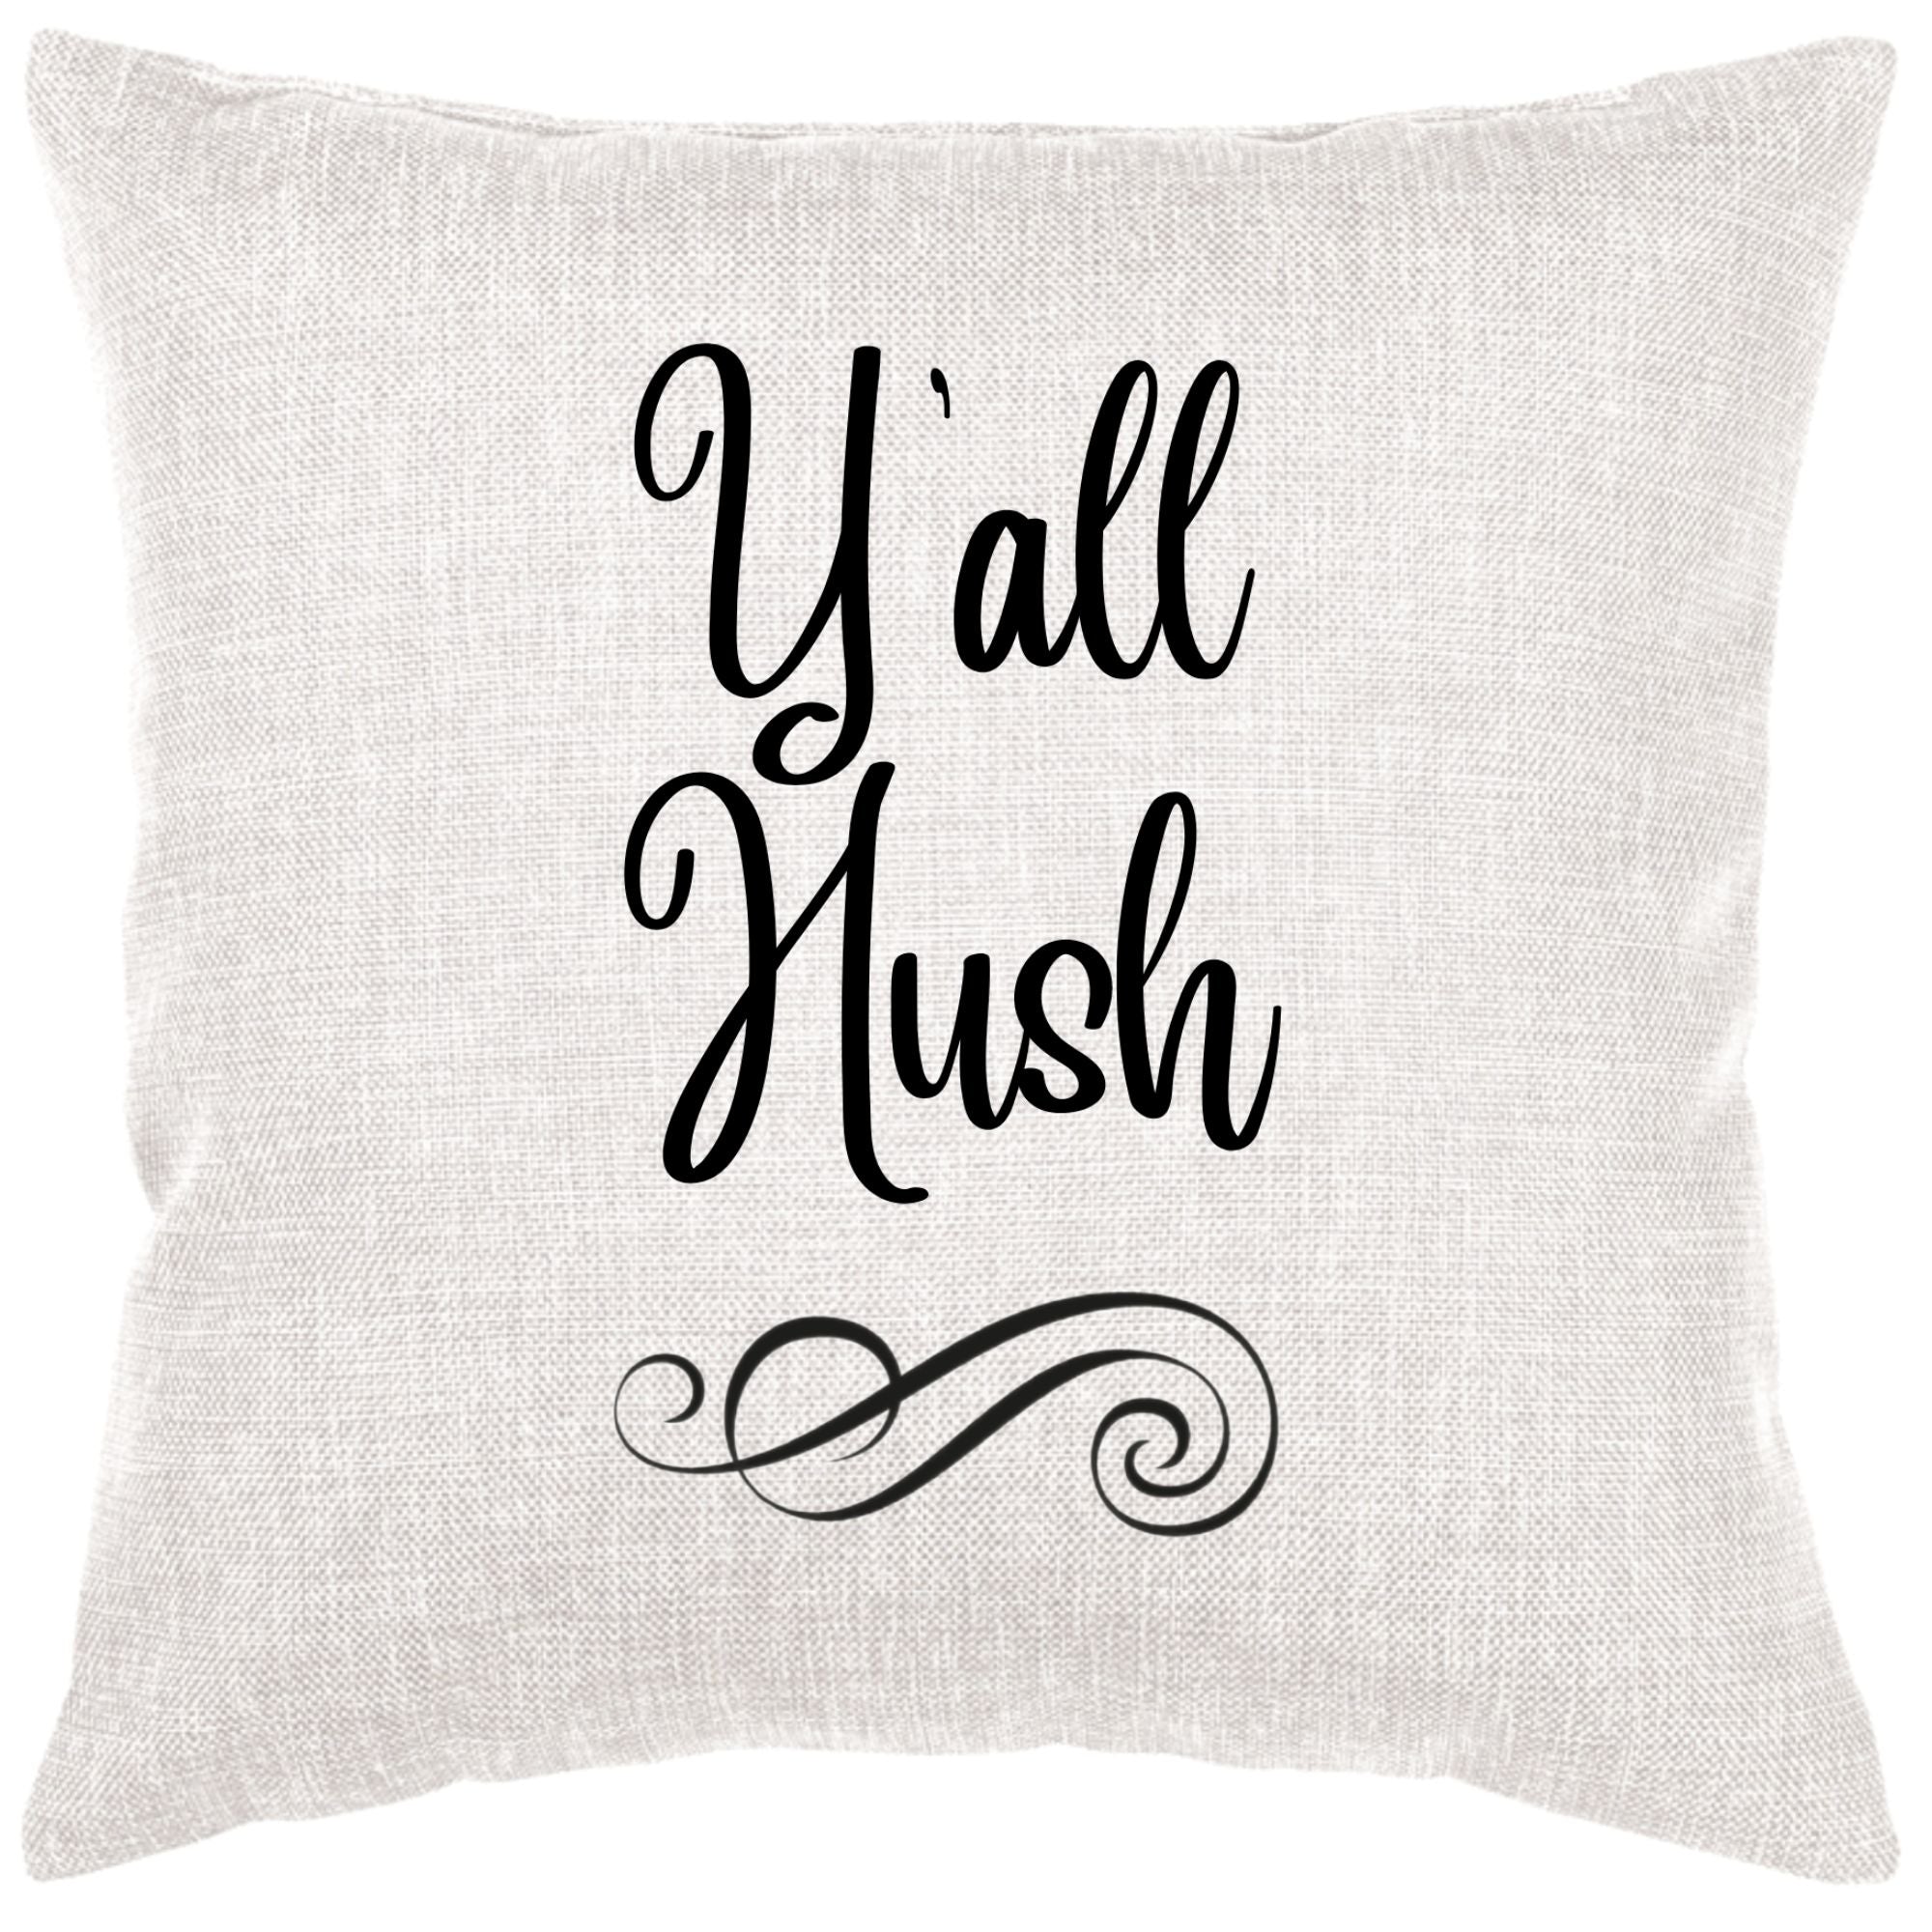 Y'all Hush Down Pillow